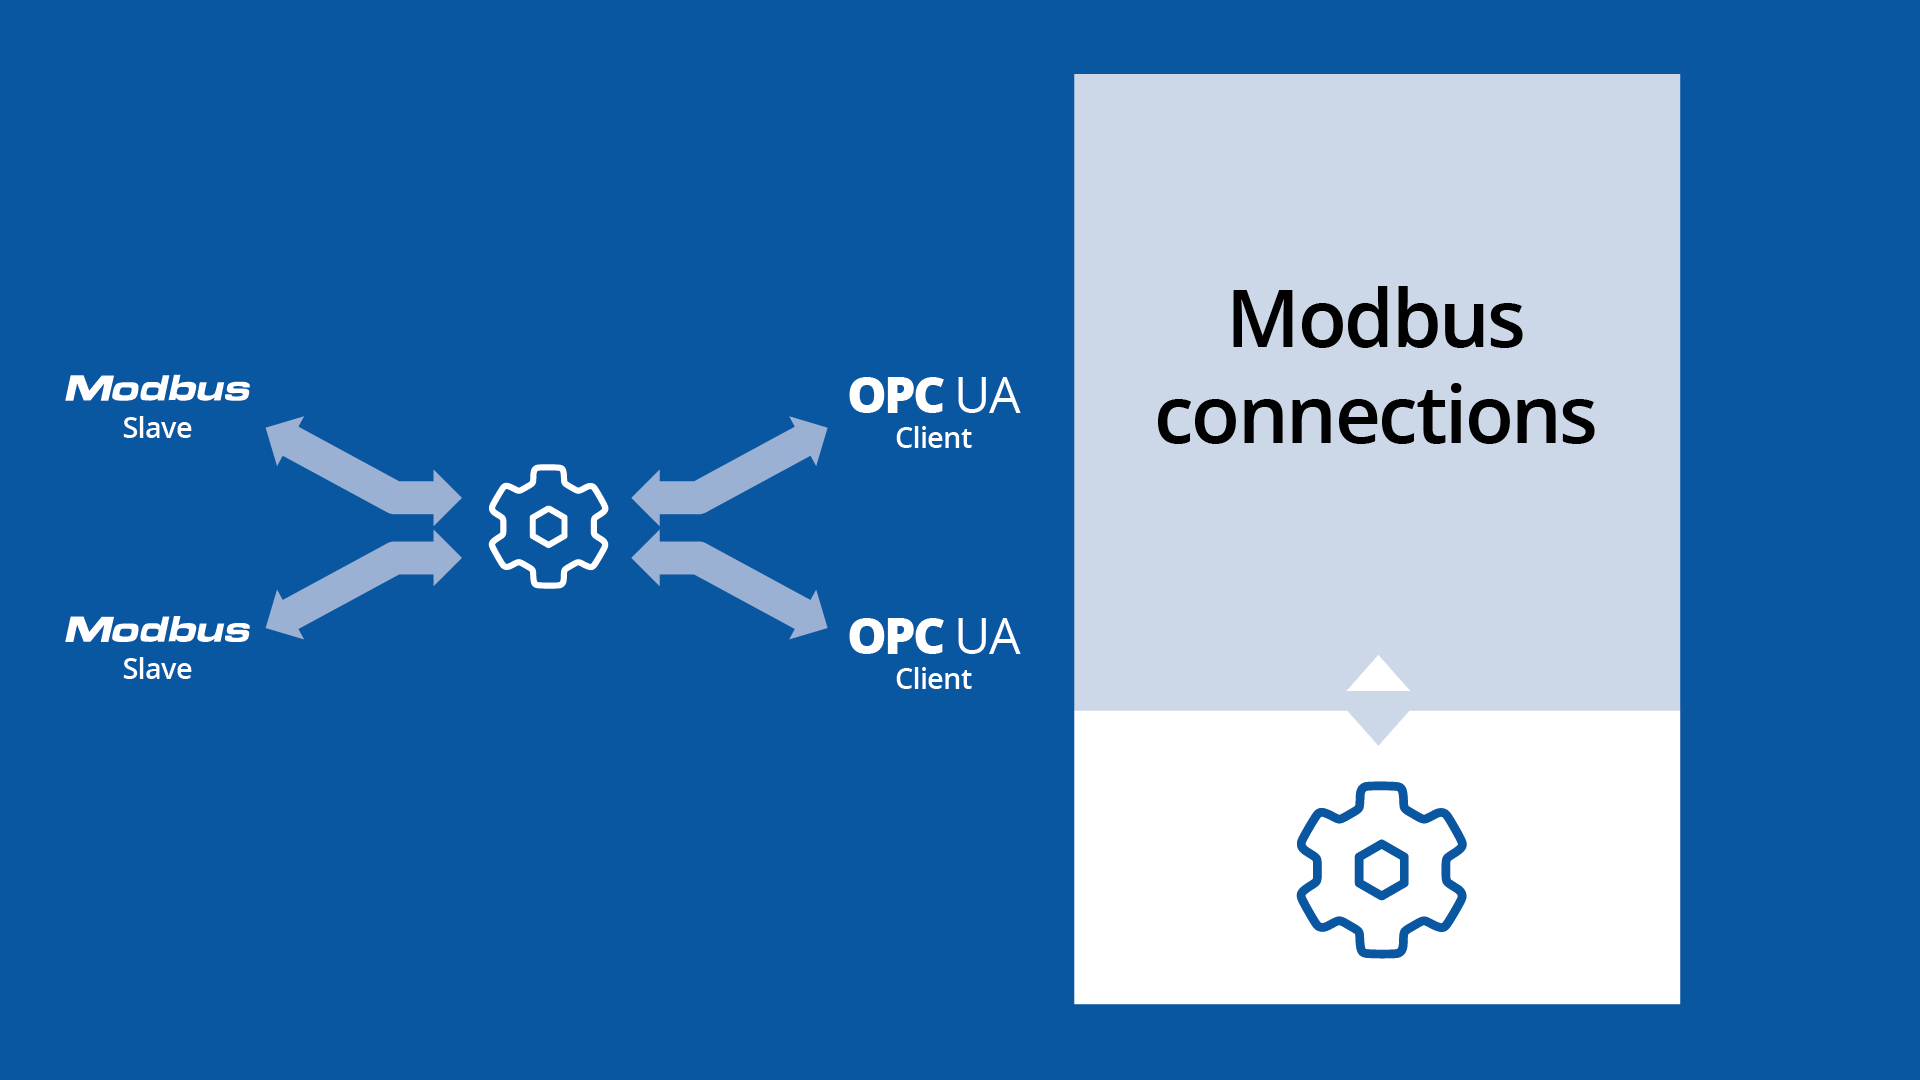 Modbus connections